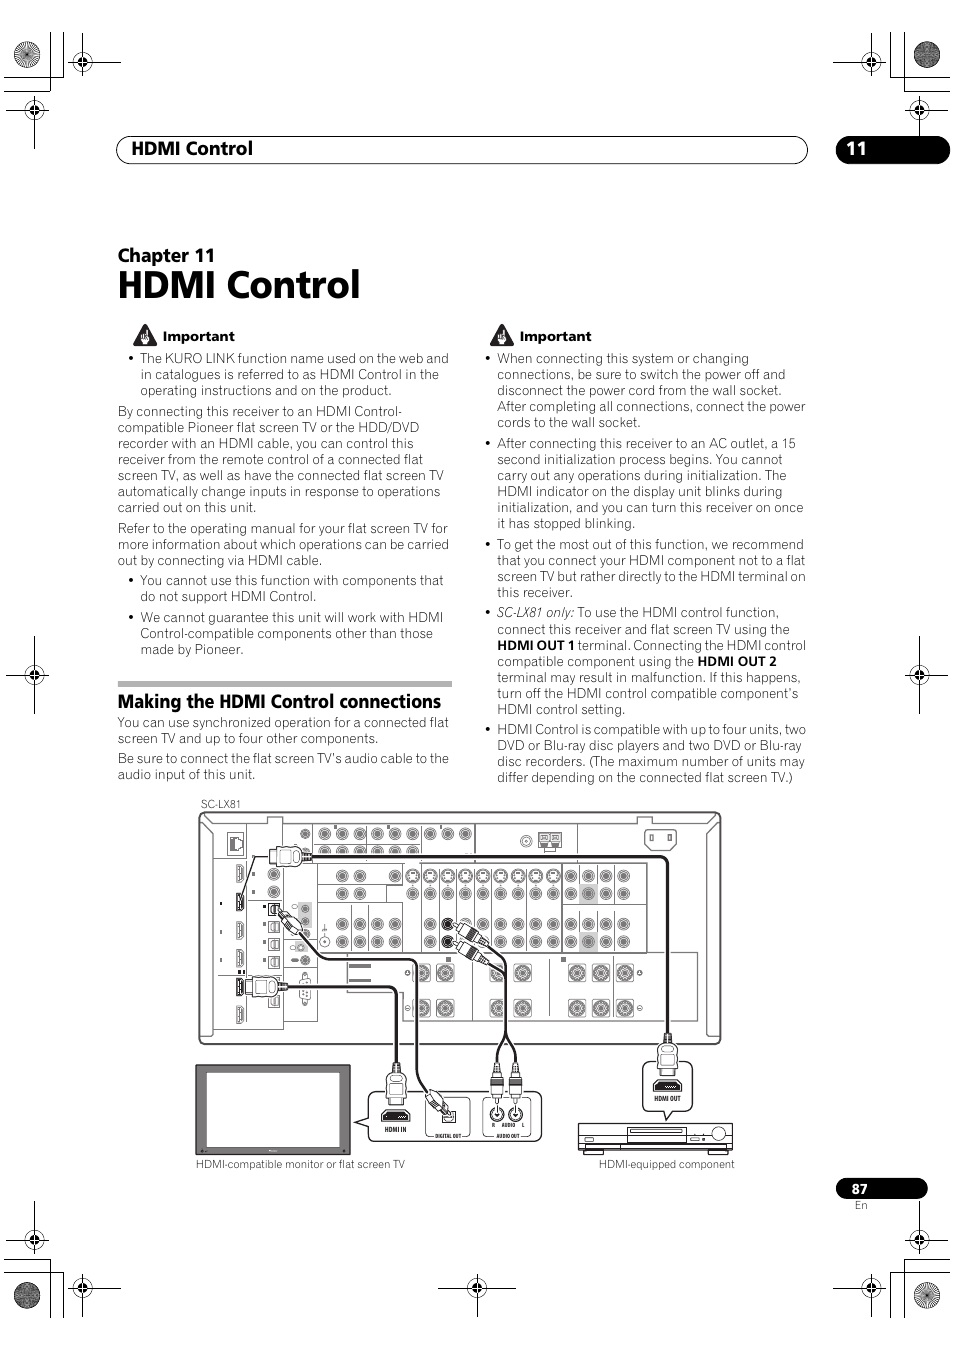 Making the hdmi control connections, Hdmi control, Hdmi control 11 | Pioneer  SC-LX81 User Manual | Page 87 / 134 | Original mode